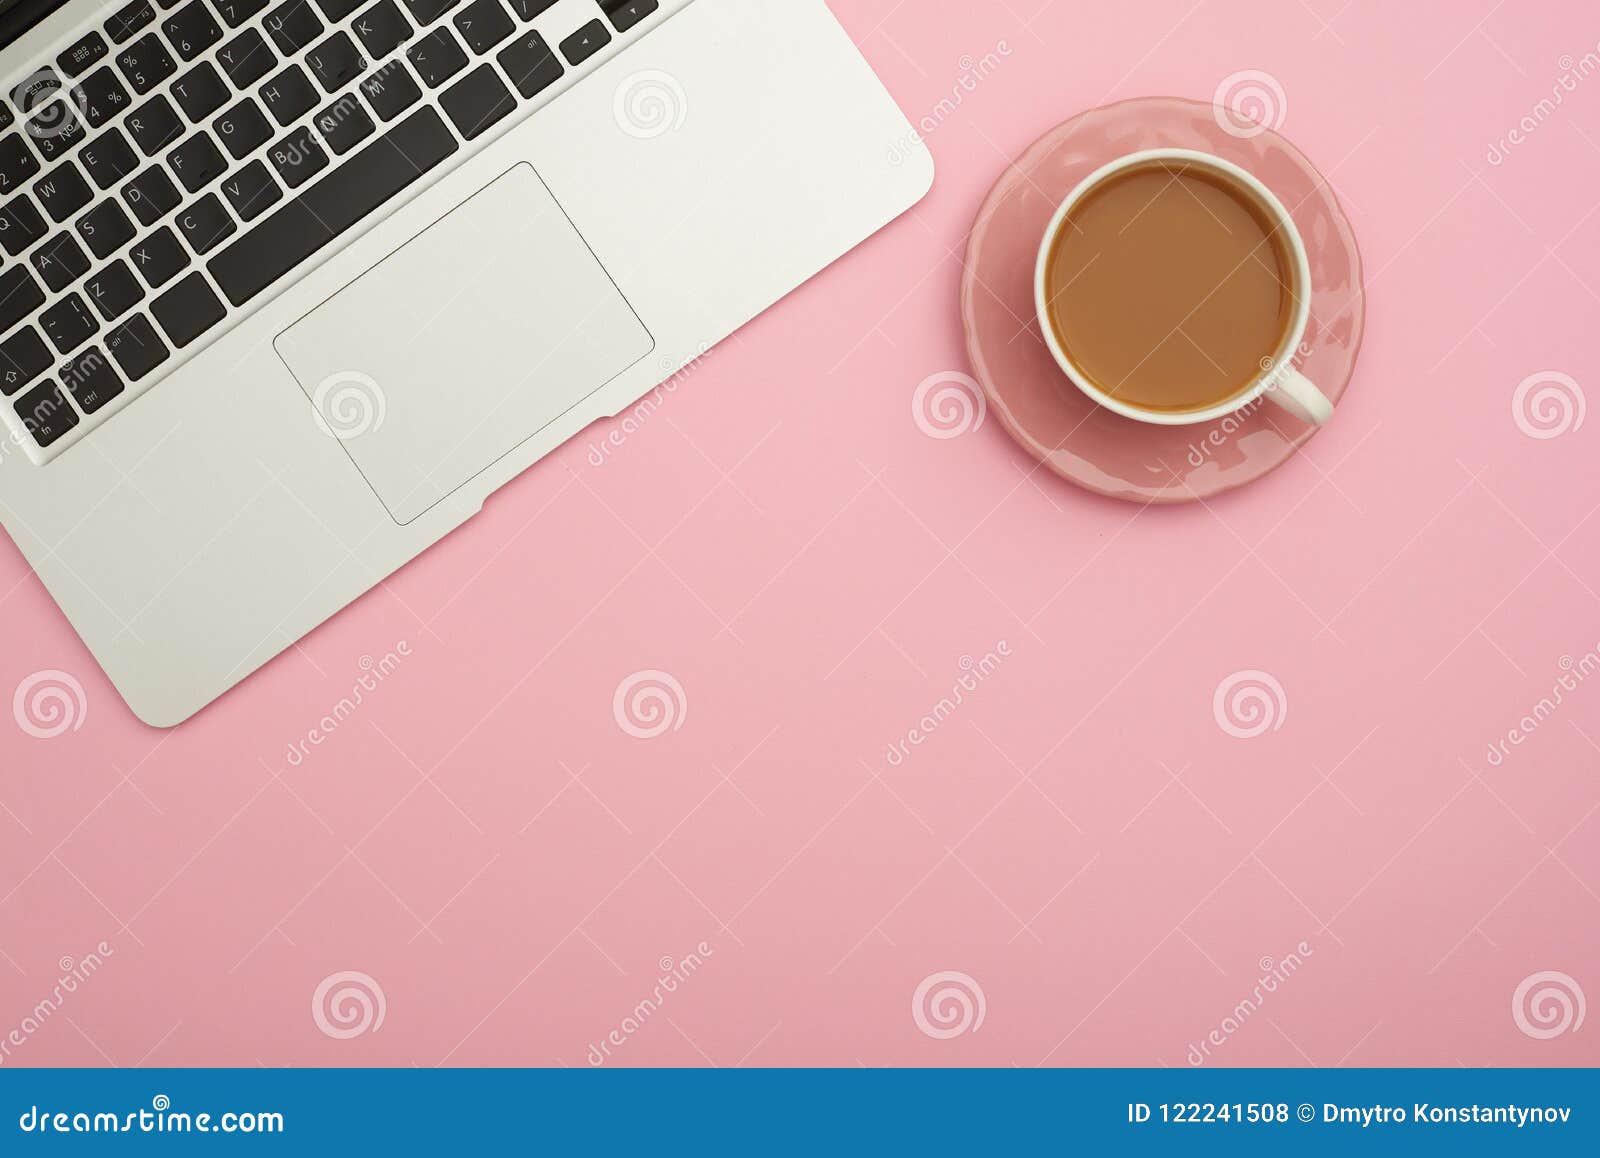 Workplace Flatlay with Laptop and Coffee Cup Stock Photo - Image of ...